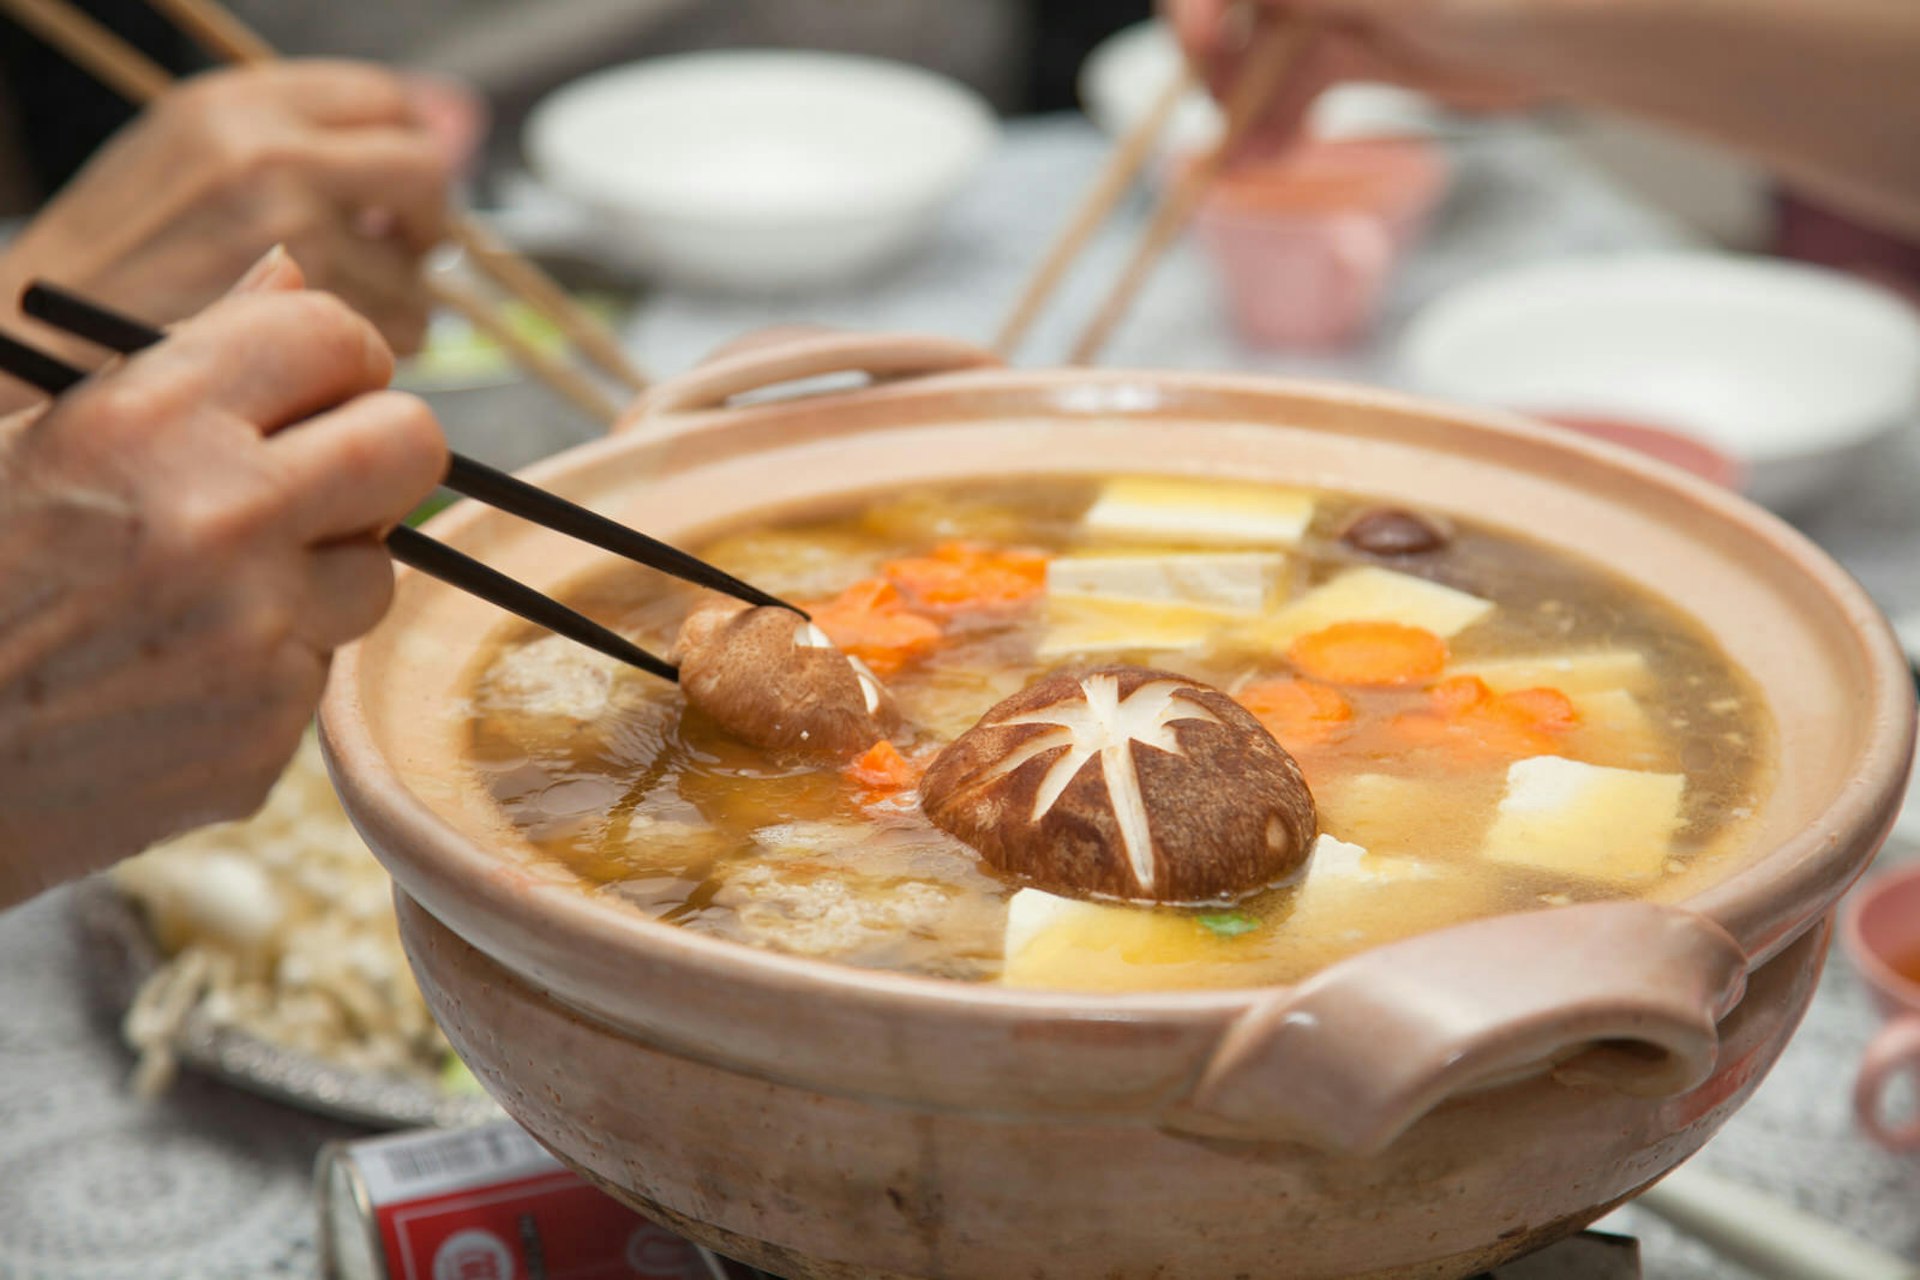 People share a nabe of broth and winter vegetables using chopsticks